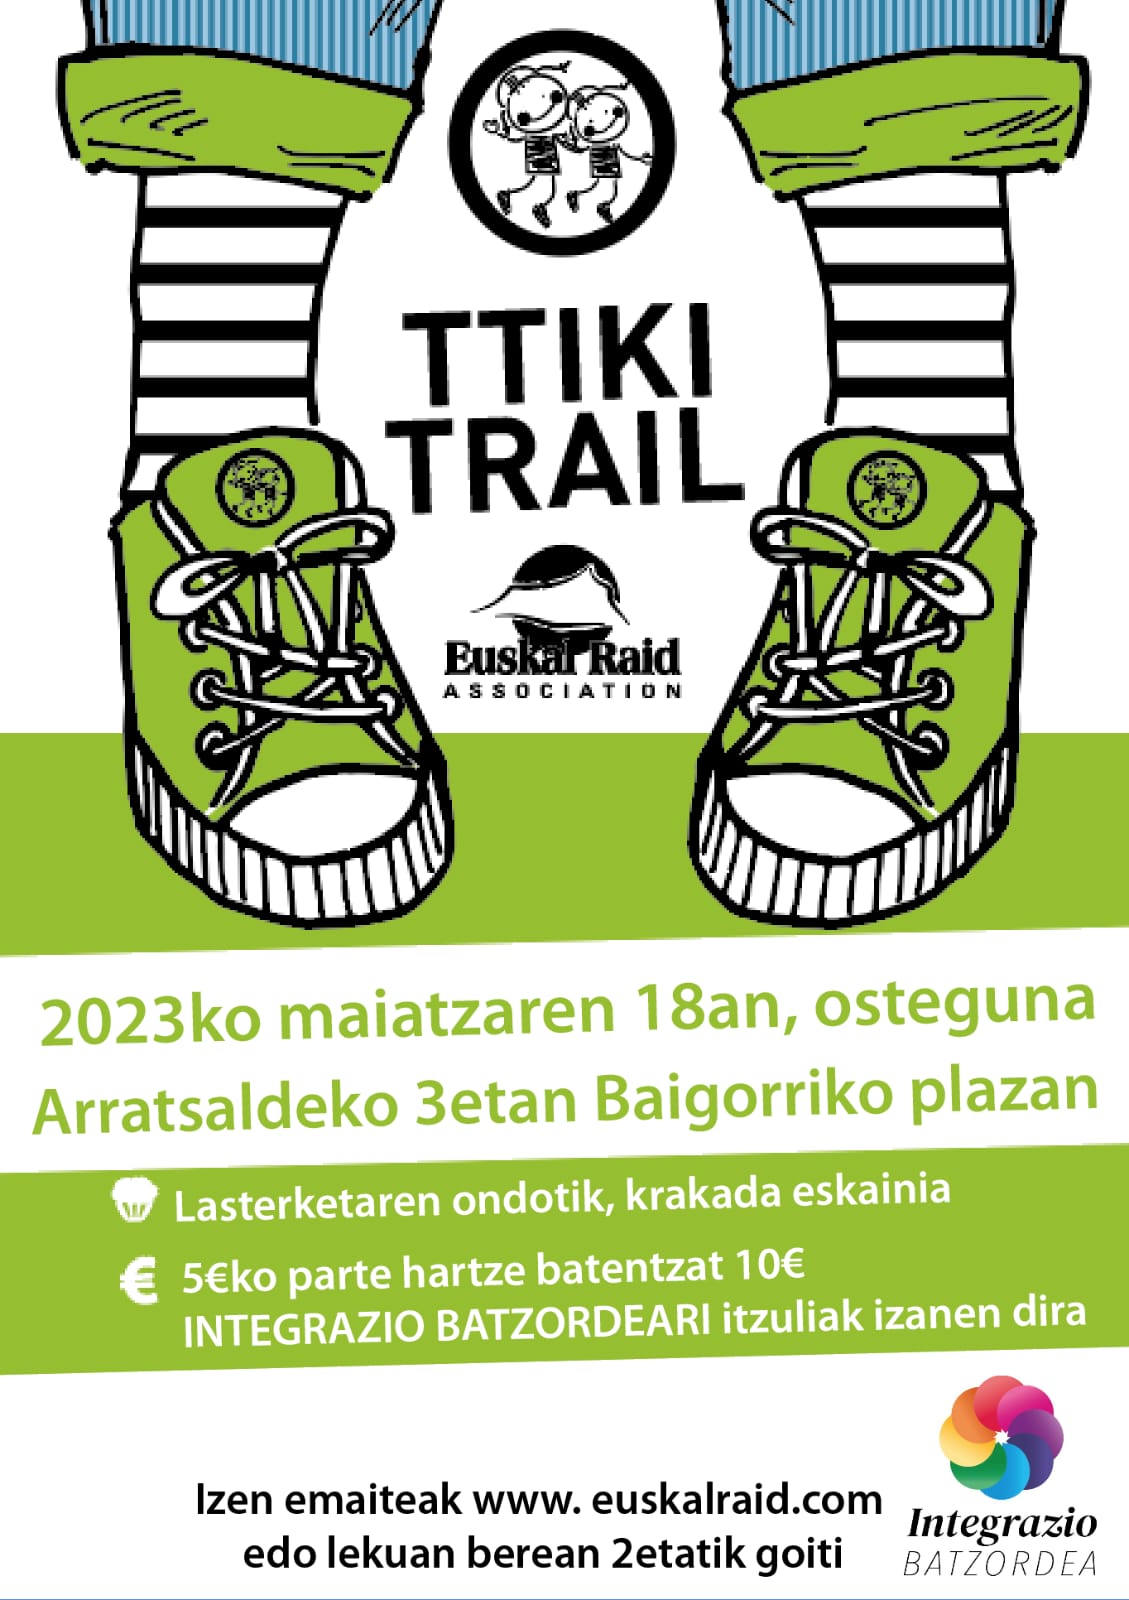 You are currently viewing Ttiki trail Baigorrin